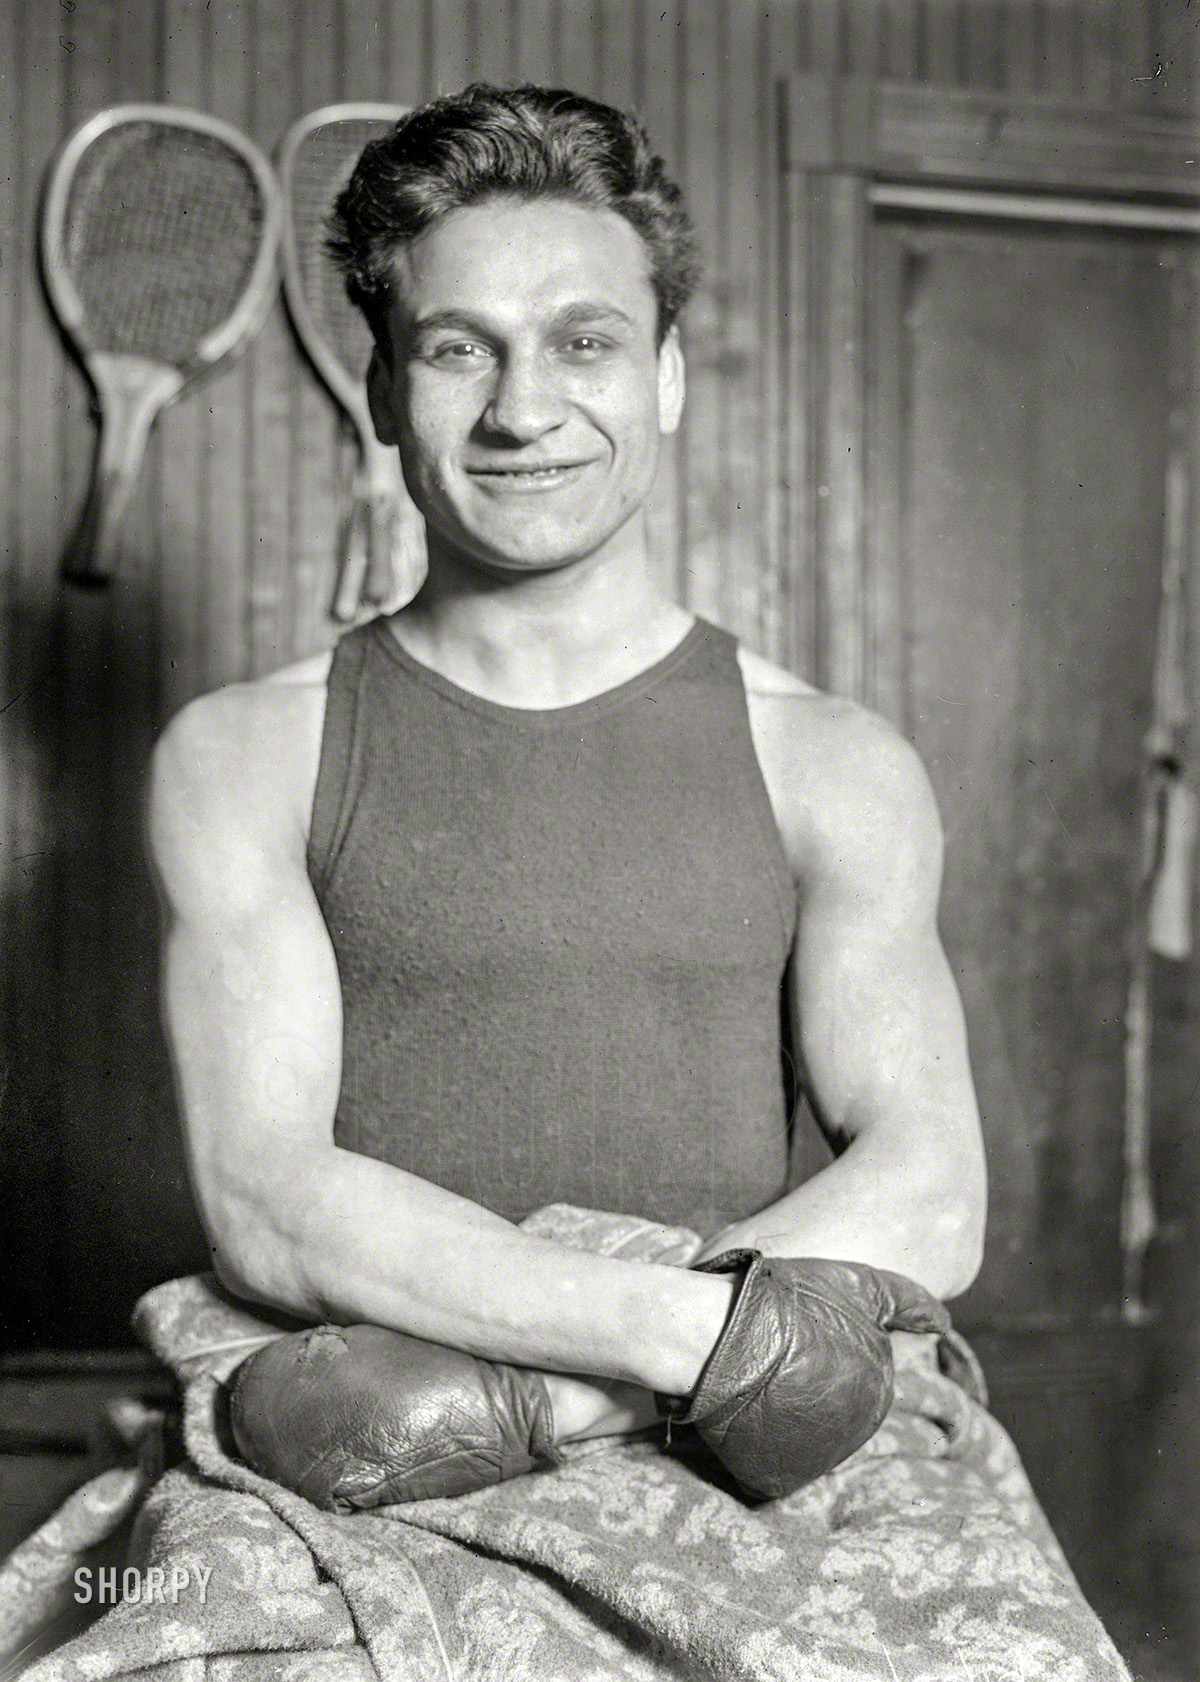 New York, 1914. "Charlie White." Chicago lightweight born 1892 in Liverpool; retired from the ring in 1925. 5x7 inch glass negative. View full size.